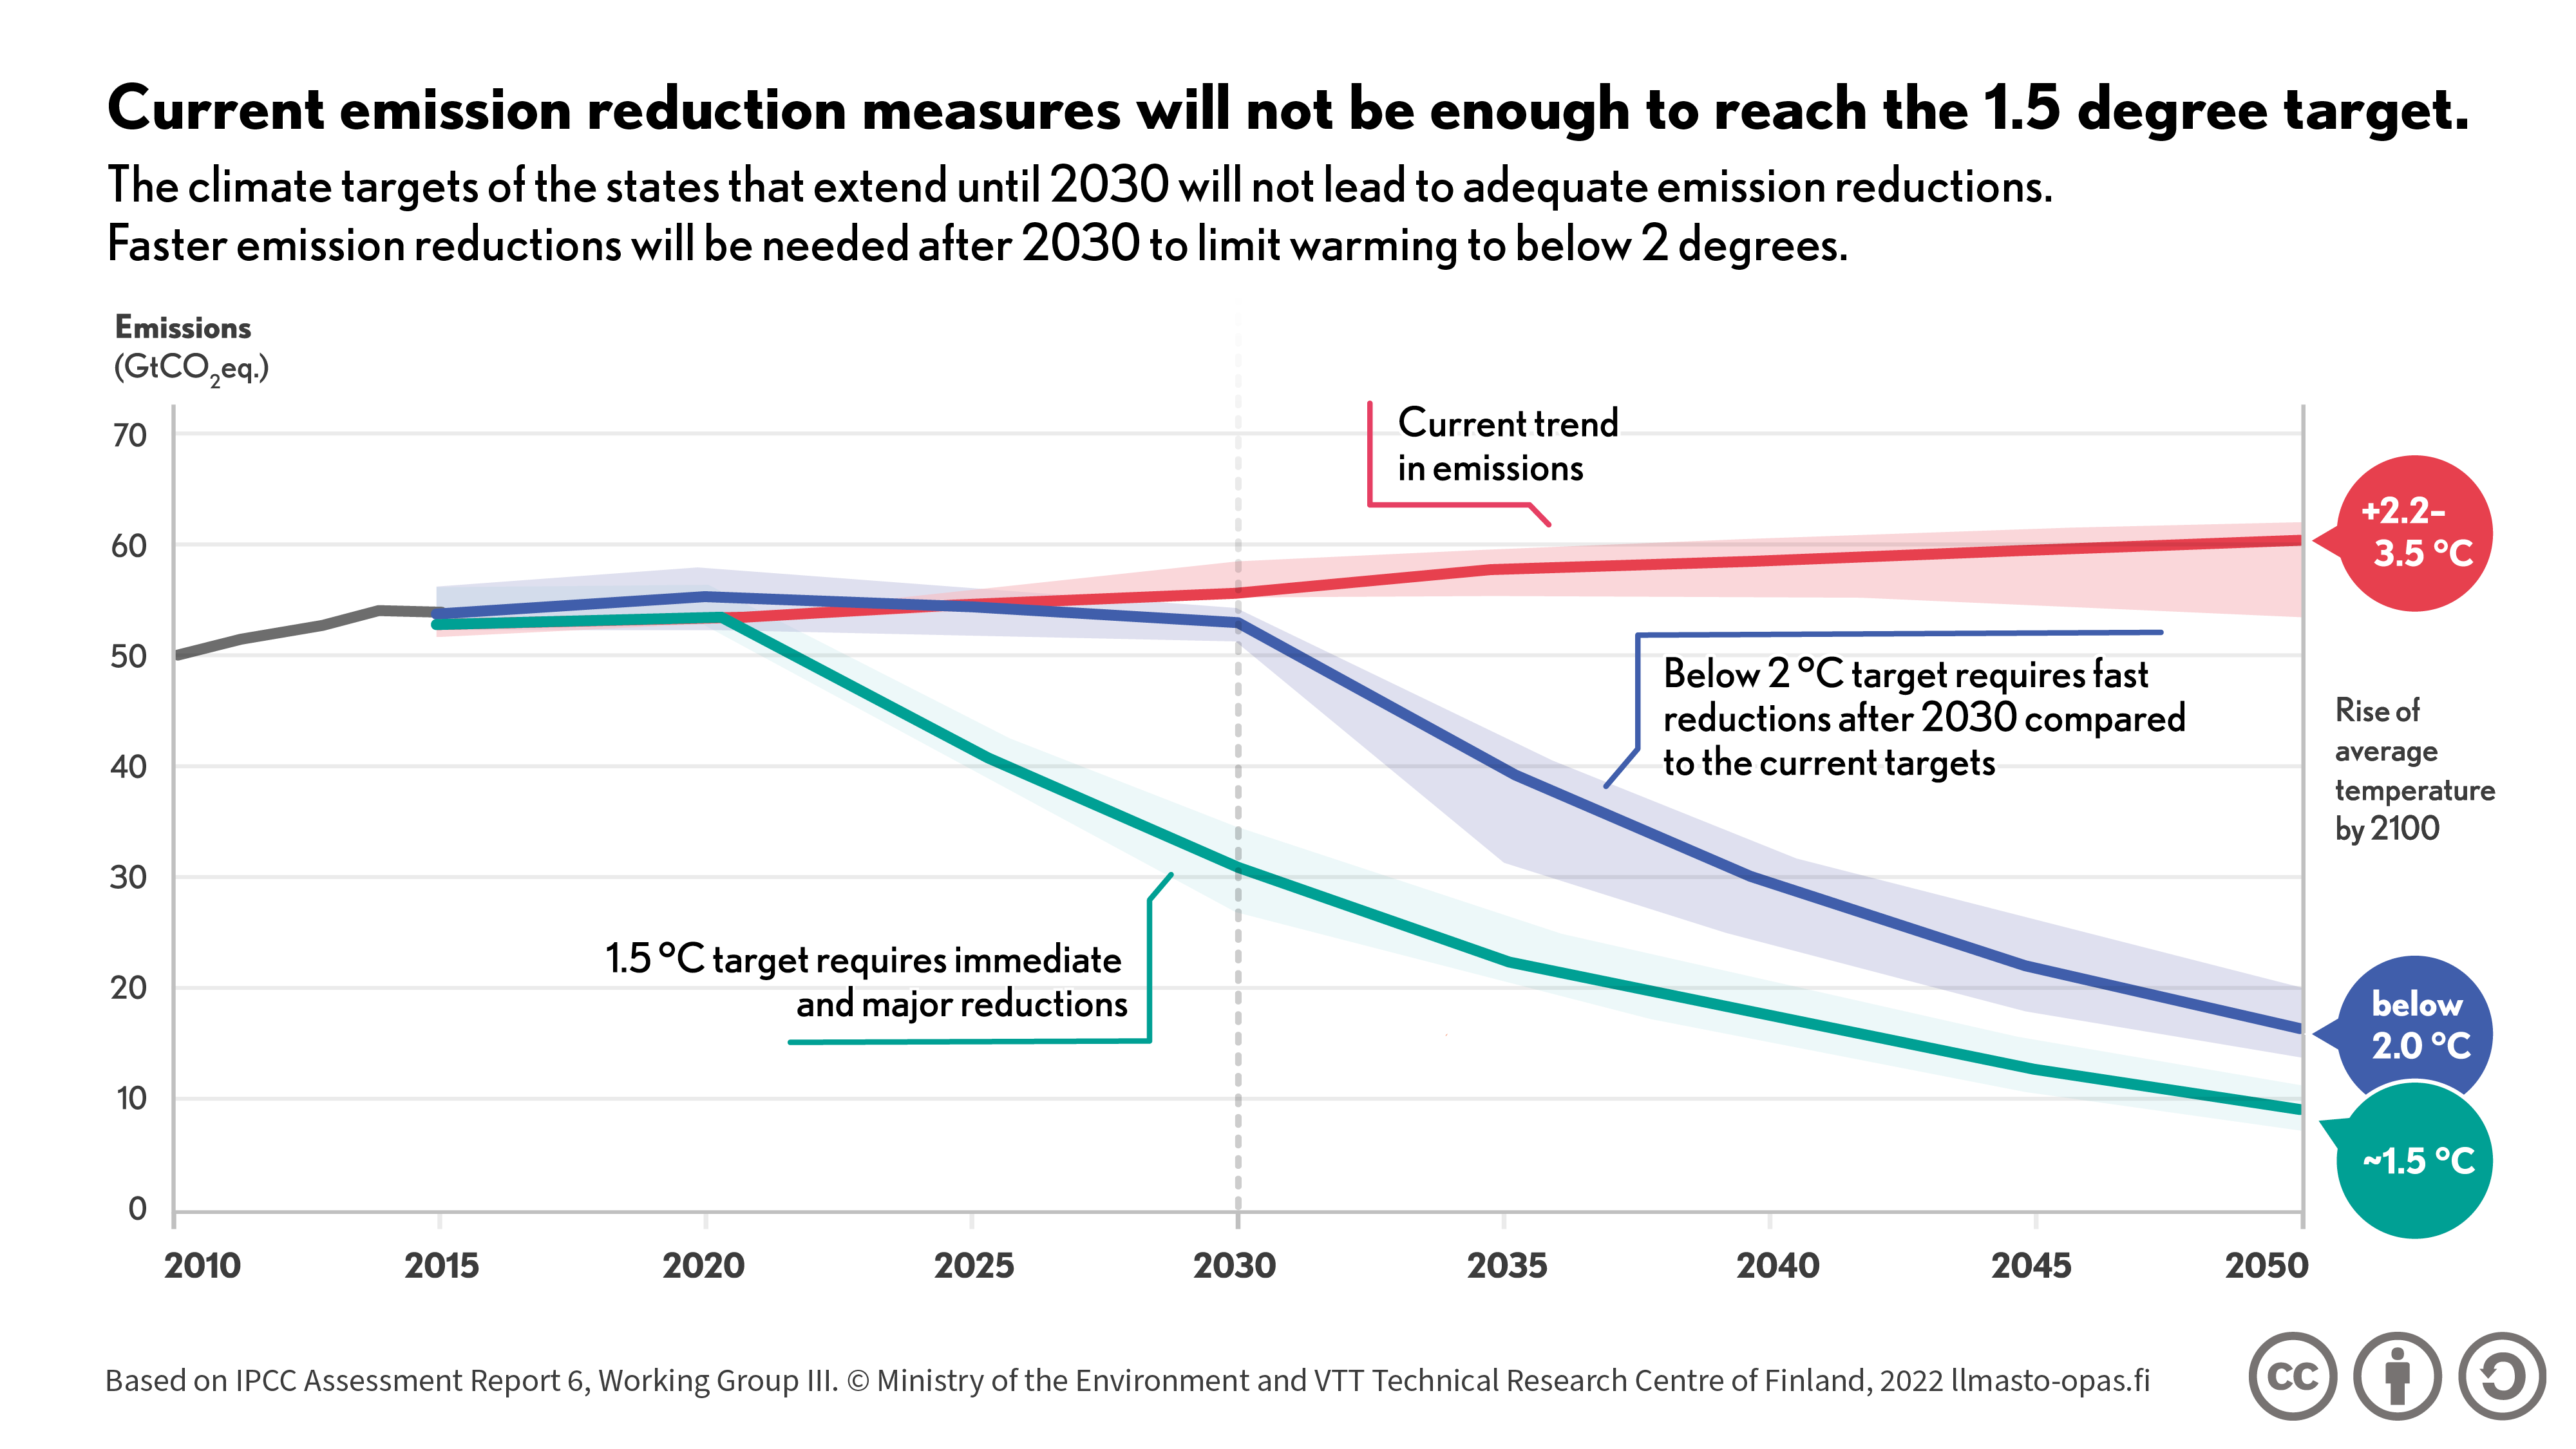 Chart showing how current trends will lead to +2.2–3.5°C increase in temperature, below 2.0°C target and ~1.5°C target